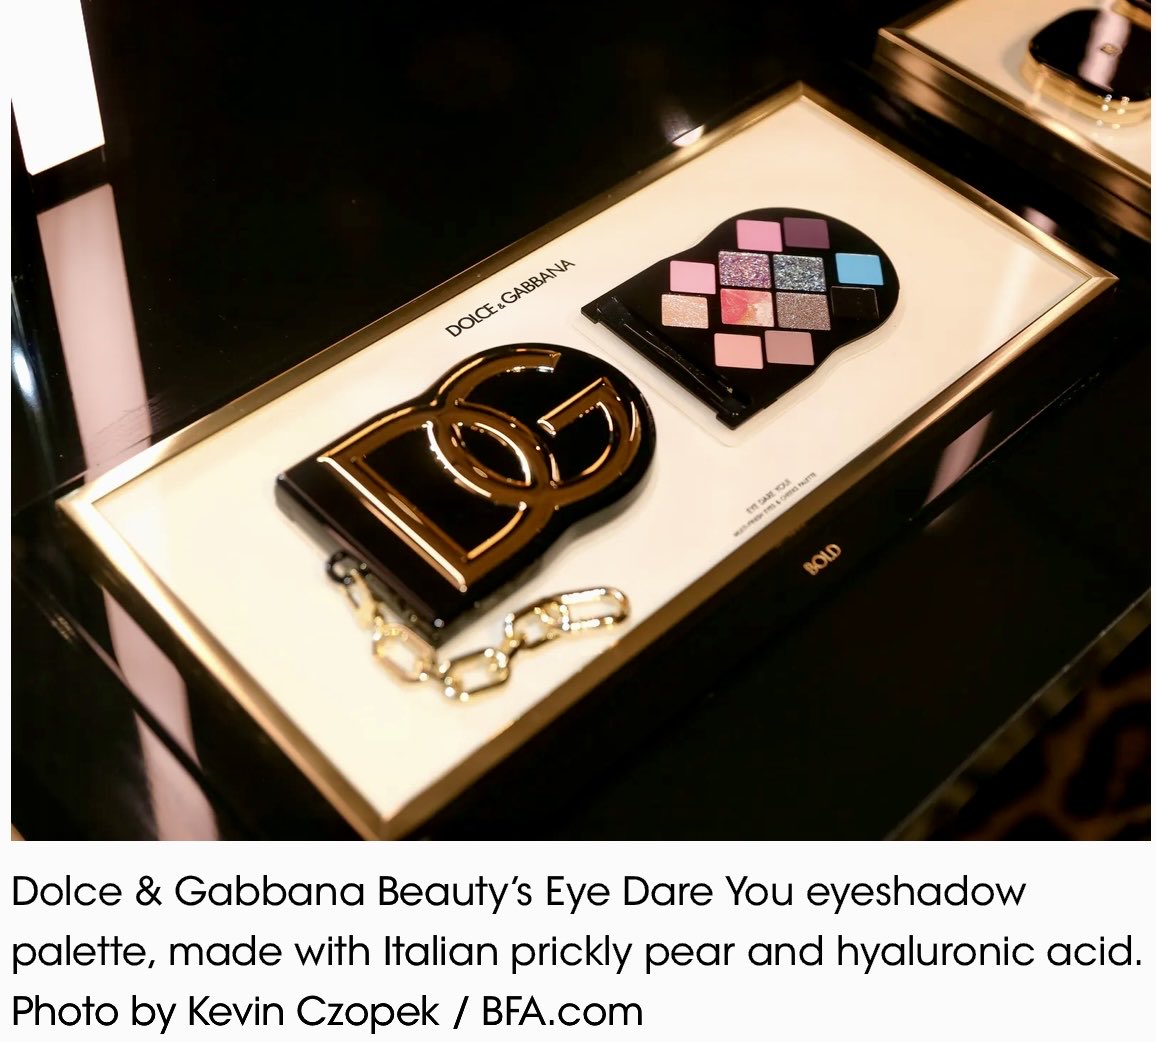 👛 Dolce & Gabbana’s €4 billion bet on #Made in #Italy beauty By Hilary Milnes @voguebusiness #Beauty #makeup @dolcegabbana #BeautyTech #SupplyChain 👉voguebusiness.com/story/beauty/d… The luxury house has relaunched its makeup category a little over two years after bringing its…